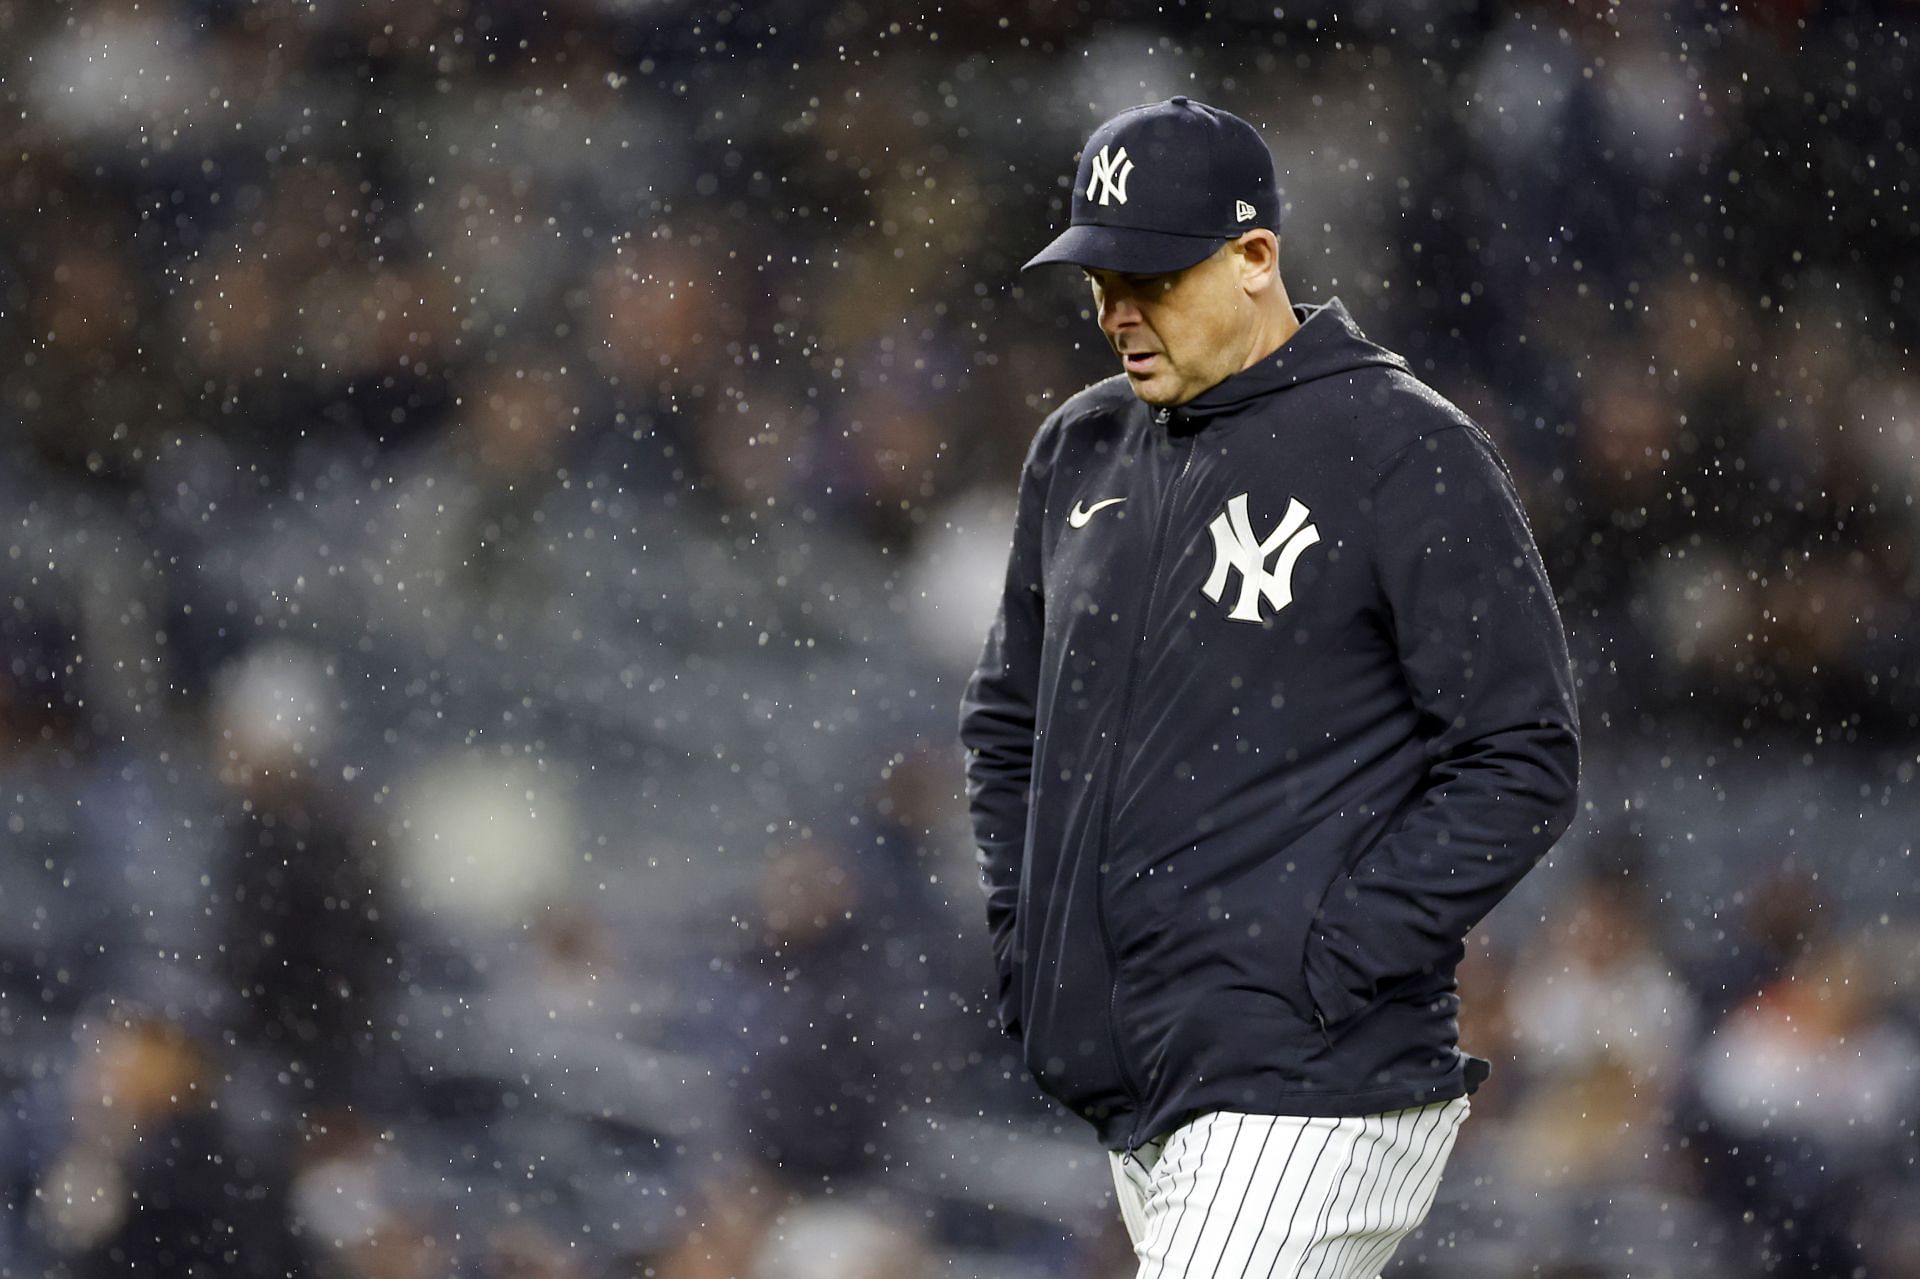 Weighing Aaron Boone's job security, forthcoming changes